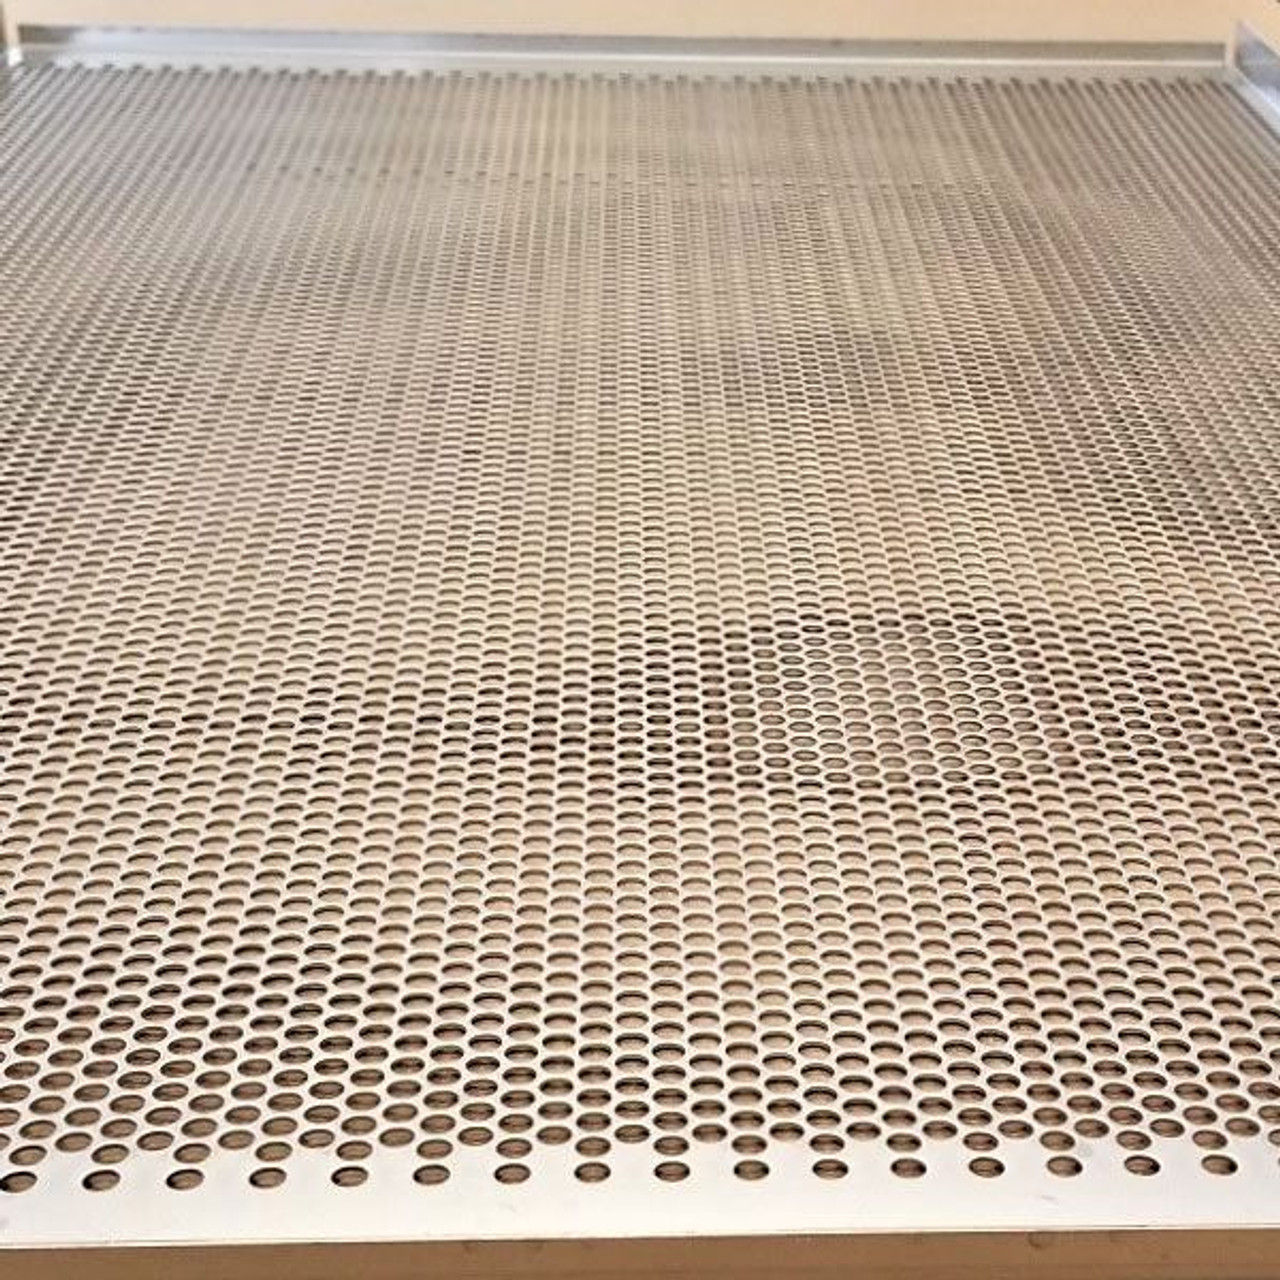 Dehydrator Resource: Perforated Stainless Steel Dehydrator Drying